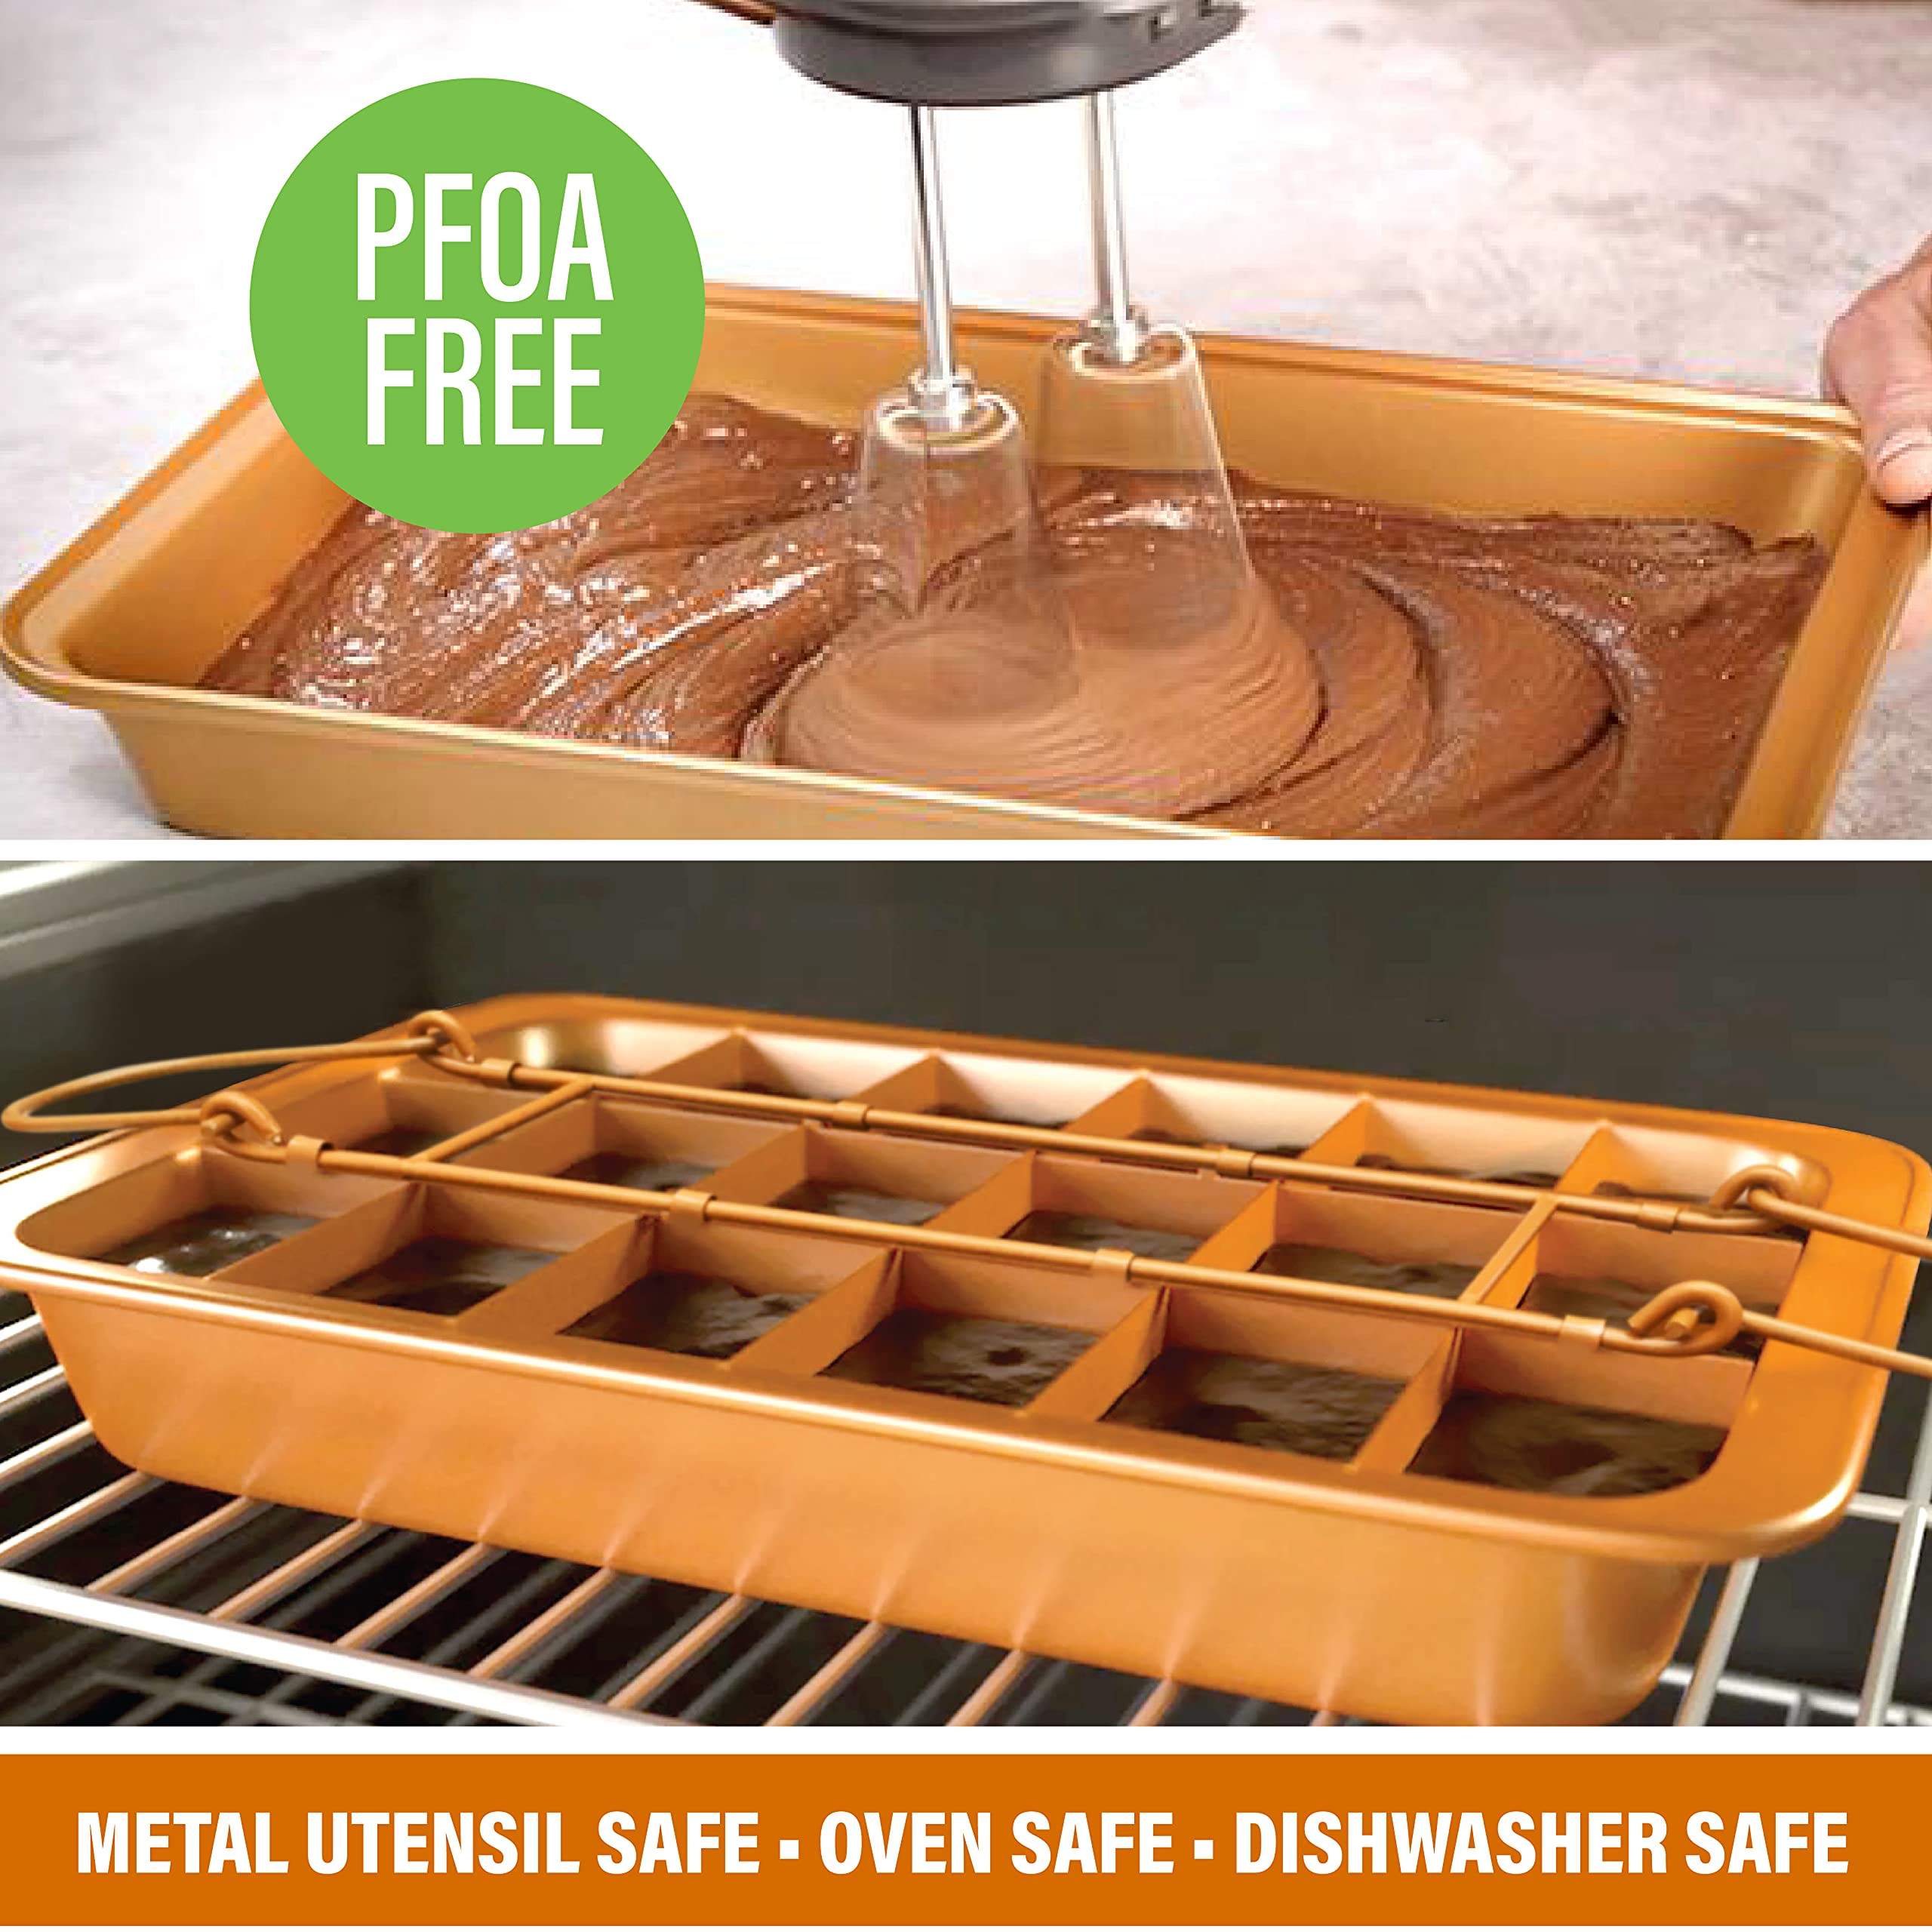 Brooklyn Brownie Copper by GOTHAM STEEL Nonstick Baking Pan with Built-In Slicer, Ensures Perfect Crispy Edges, Metal Utensil and Dishwasher Safe